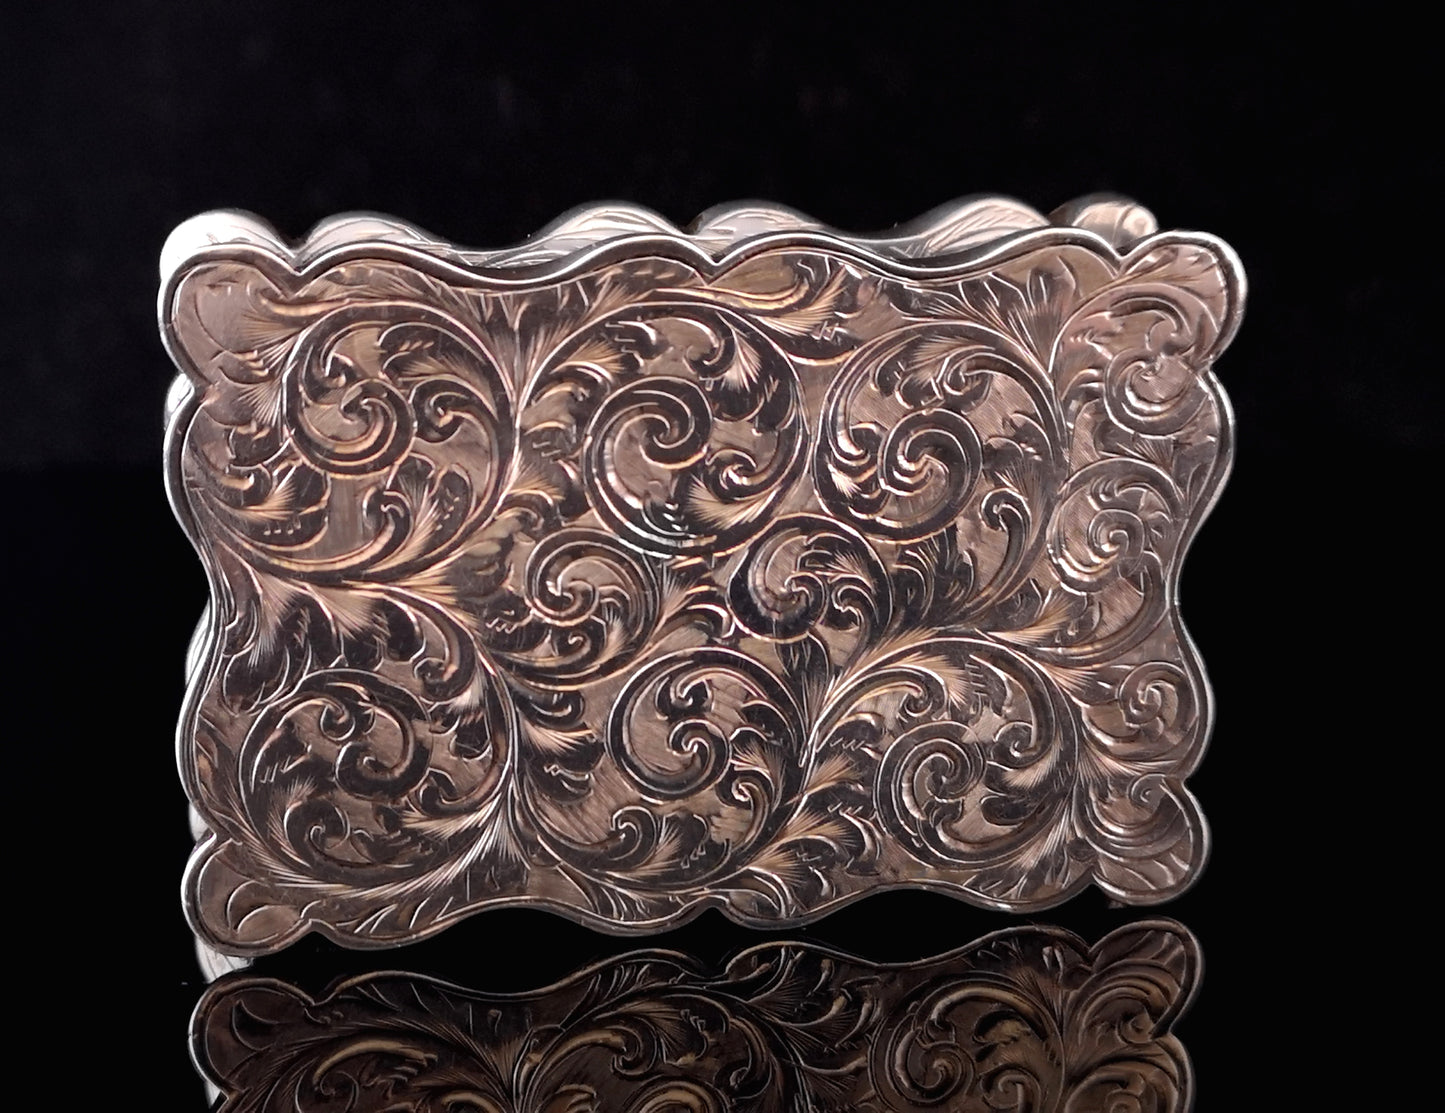 Antique silver snuff box, Deakin and Francis